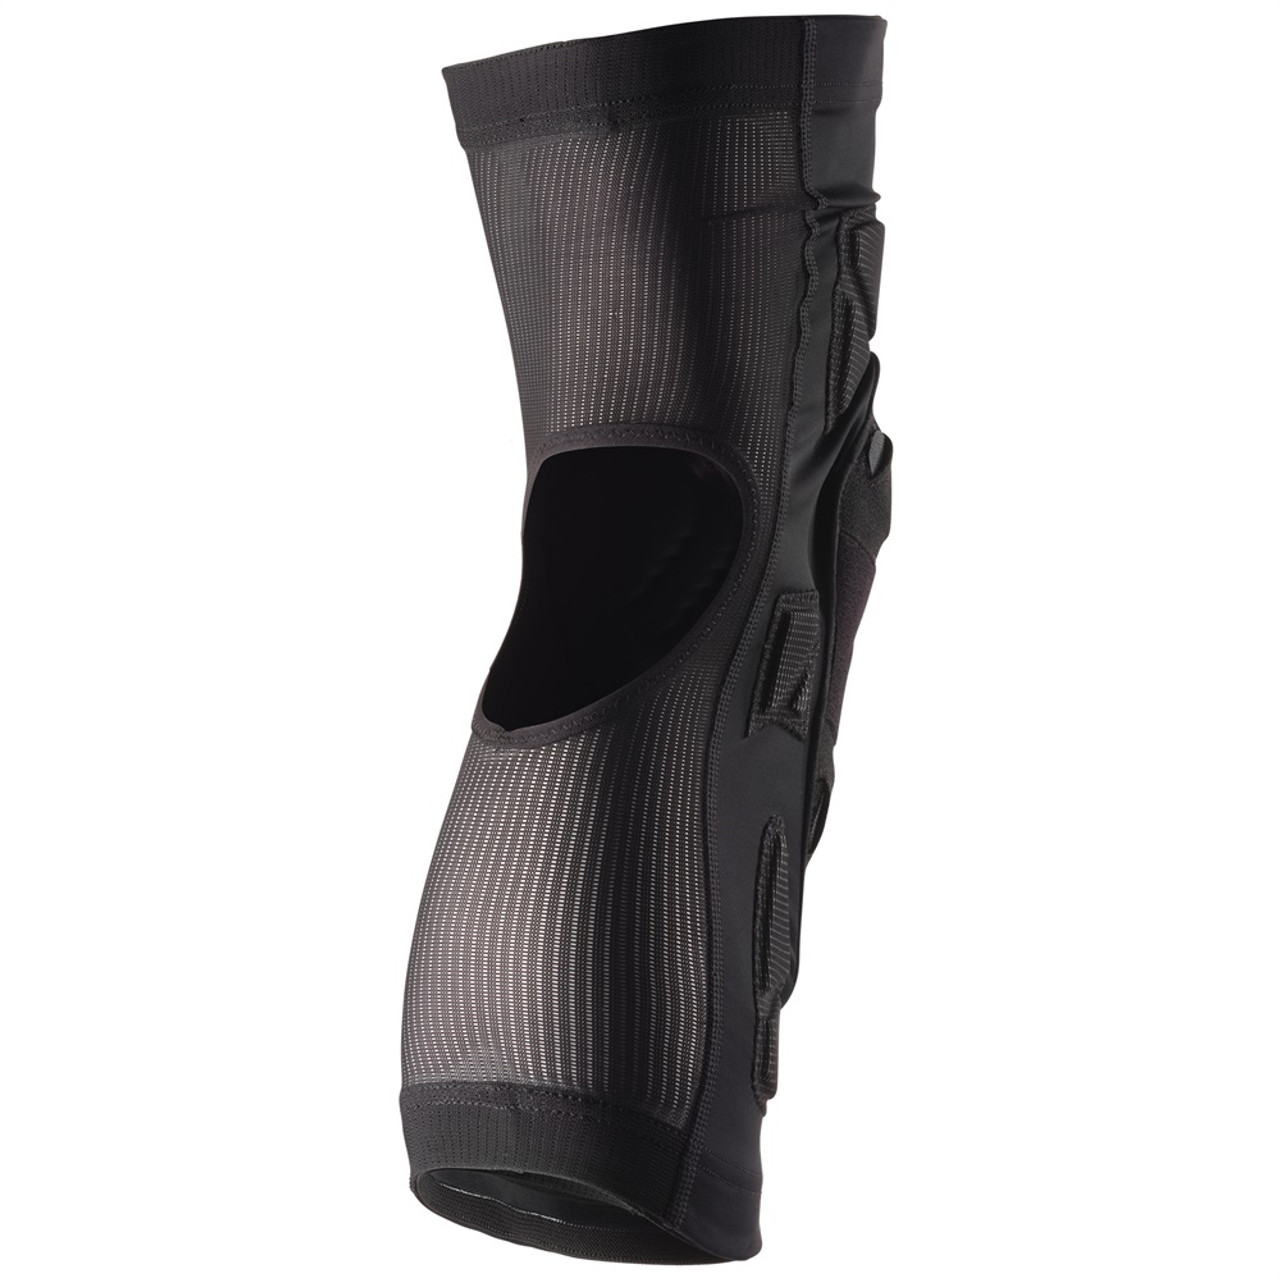 SixSixOne Recon Advance Knee Guard In Black All Sizes